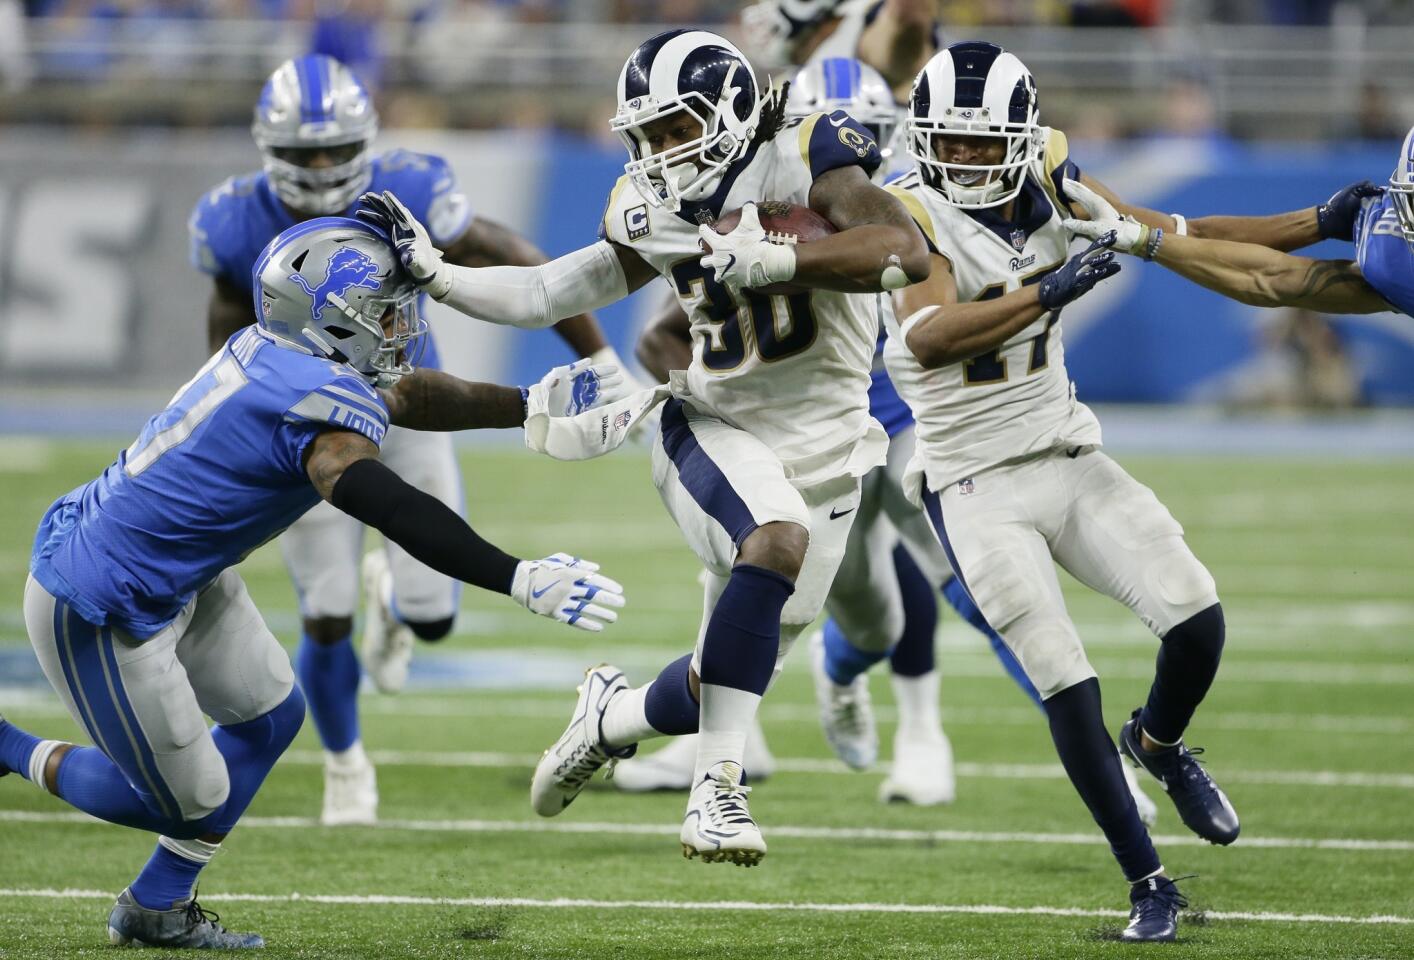 Los Angeles Rams running back Todd Gurley (30) rushes during the second half of an NFL football game against the Detroit Lions, Sunday, Dec. 2, 2018, in Detroit.